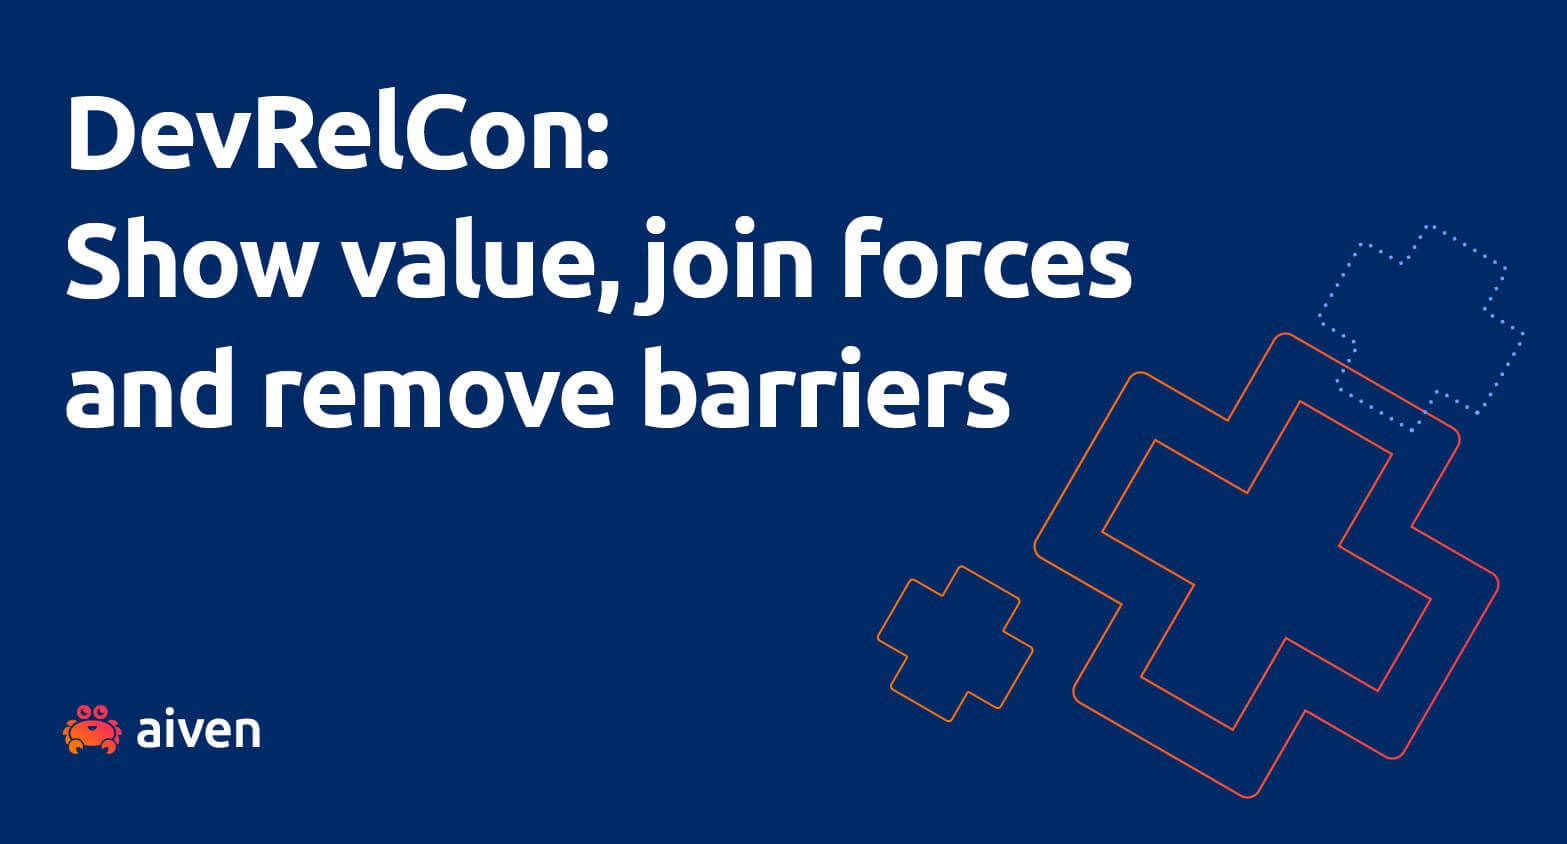 A blue background with the text "DevRelCon: Show value, join forces and remove barriers", and the Aiven logo at the bottom.